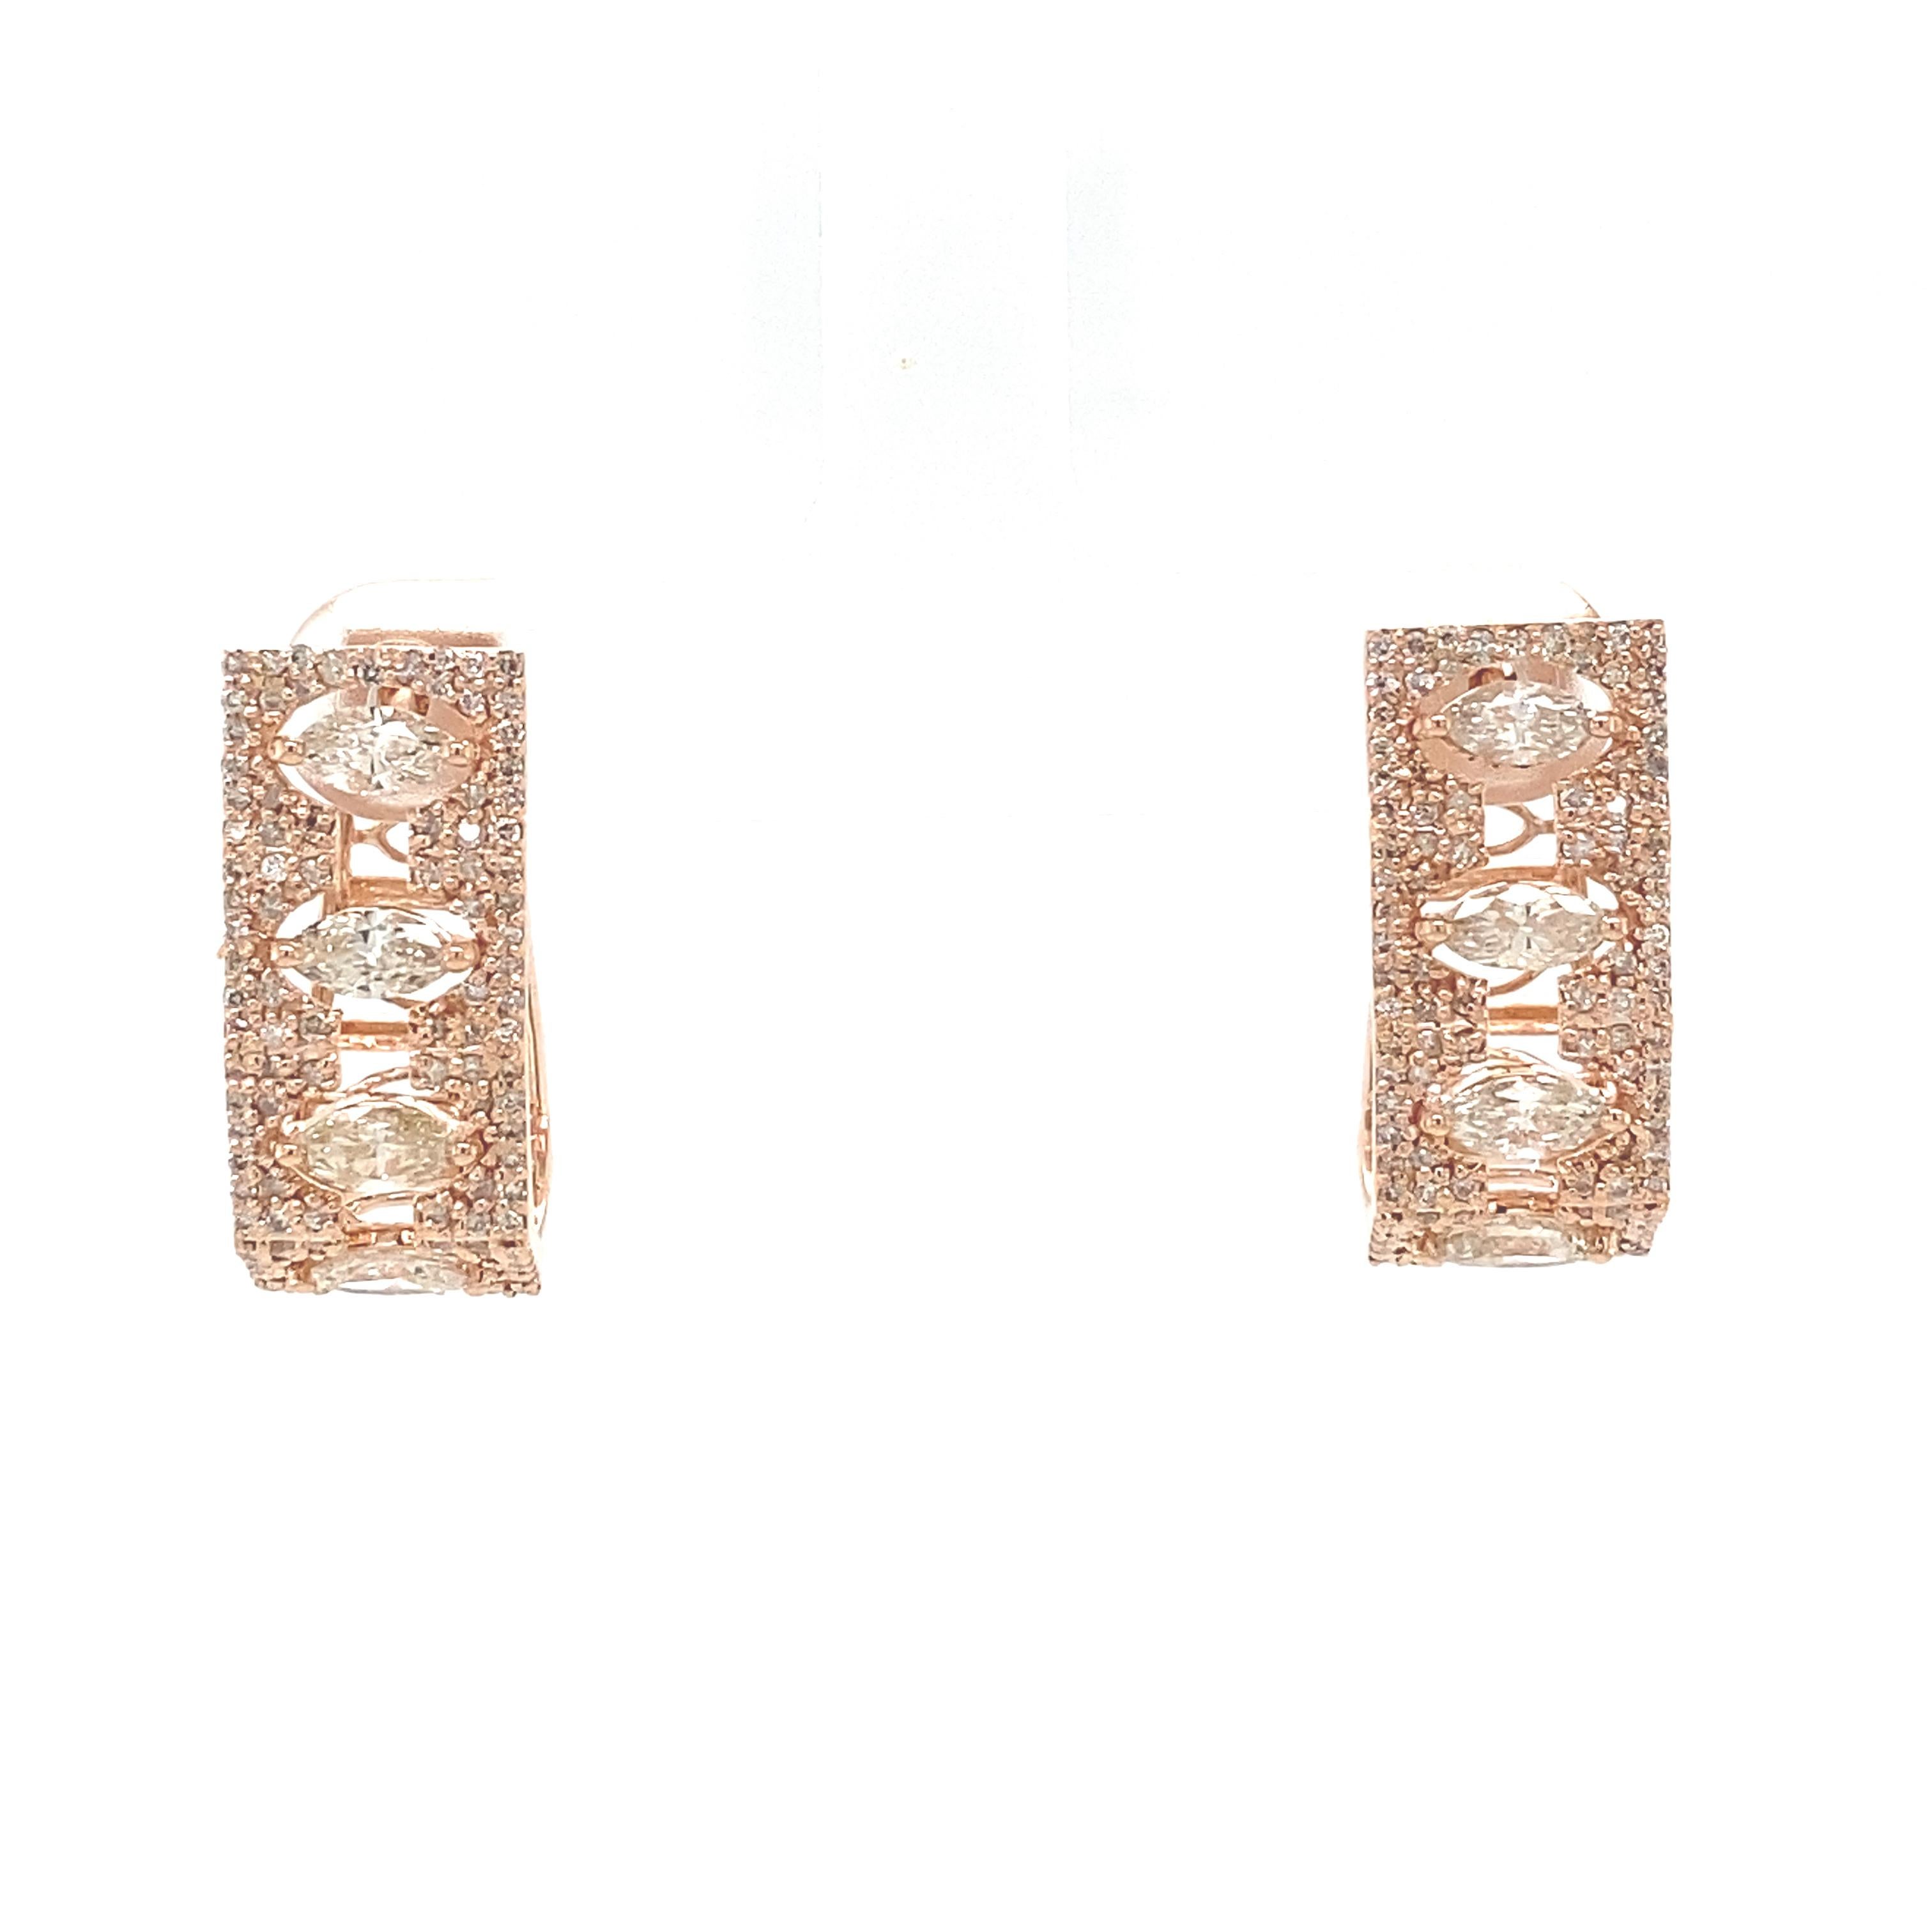 A pair of sophisticated bar plug earrings, finely crafted in 18K solid gold. These earrings feature a stunning array of marquise-cut diamonds, meticulously arranged in a vertical line to create a sleek and modern bar silhouette. Surrounding the